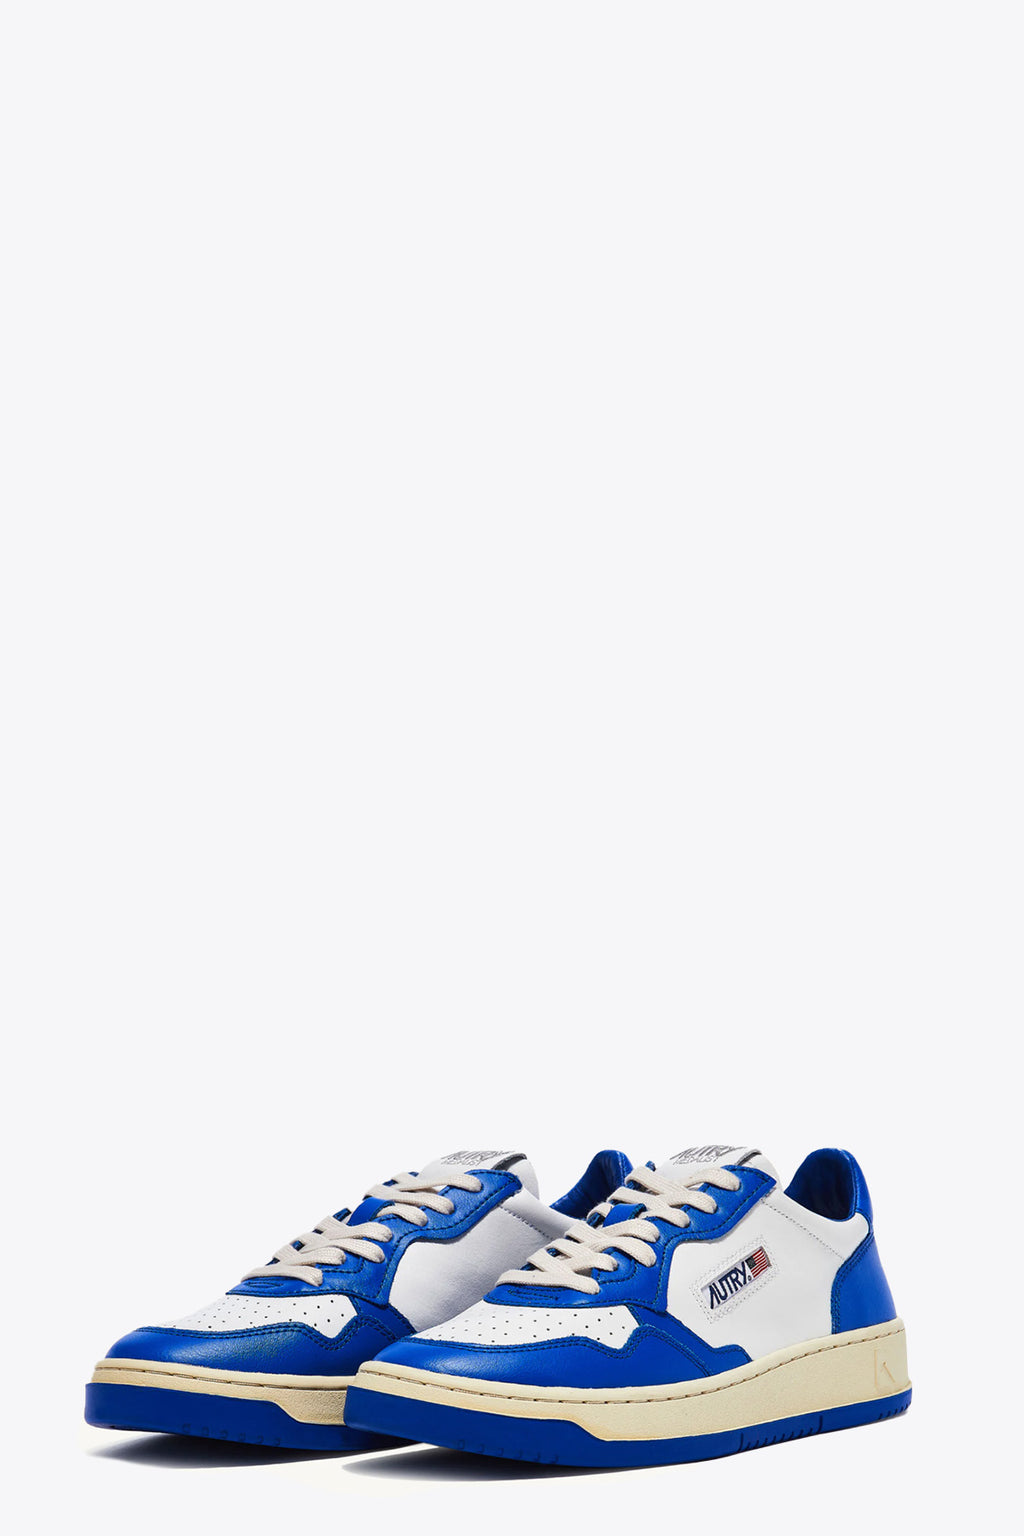 alt-image__White-and-royal-blue-leather-low-sneaker---Medalist-